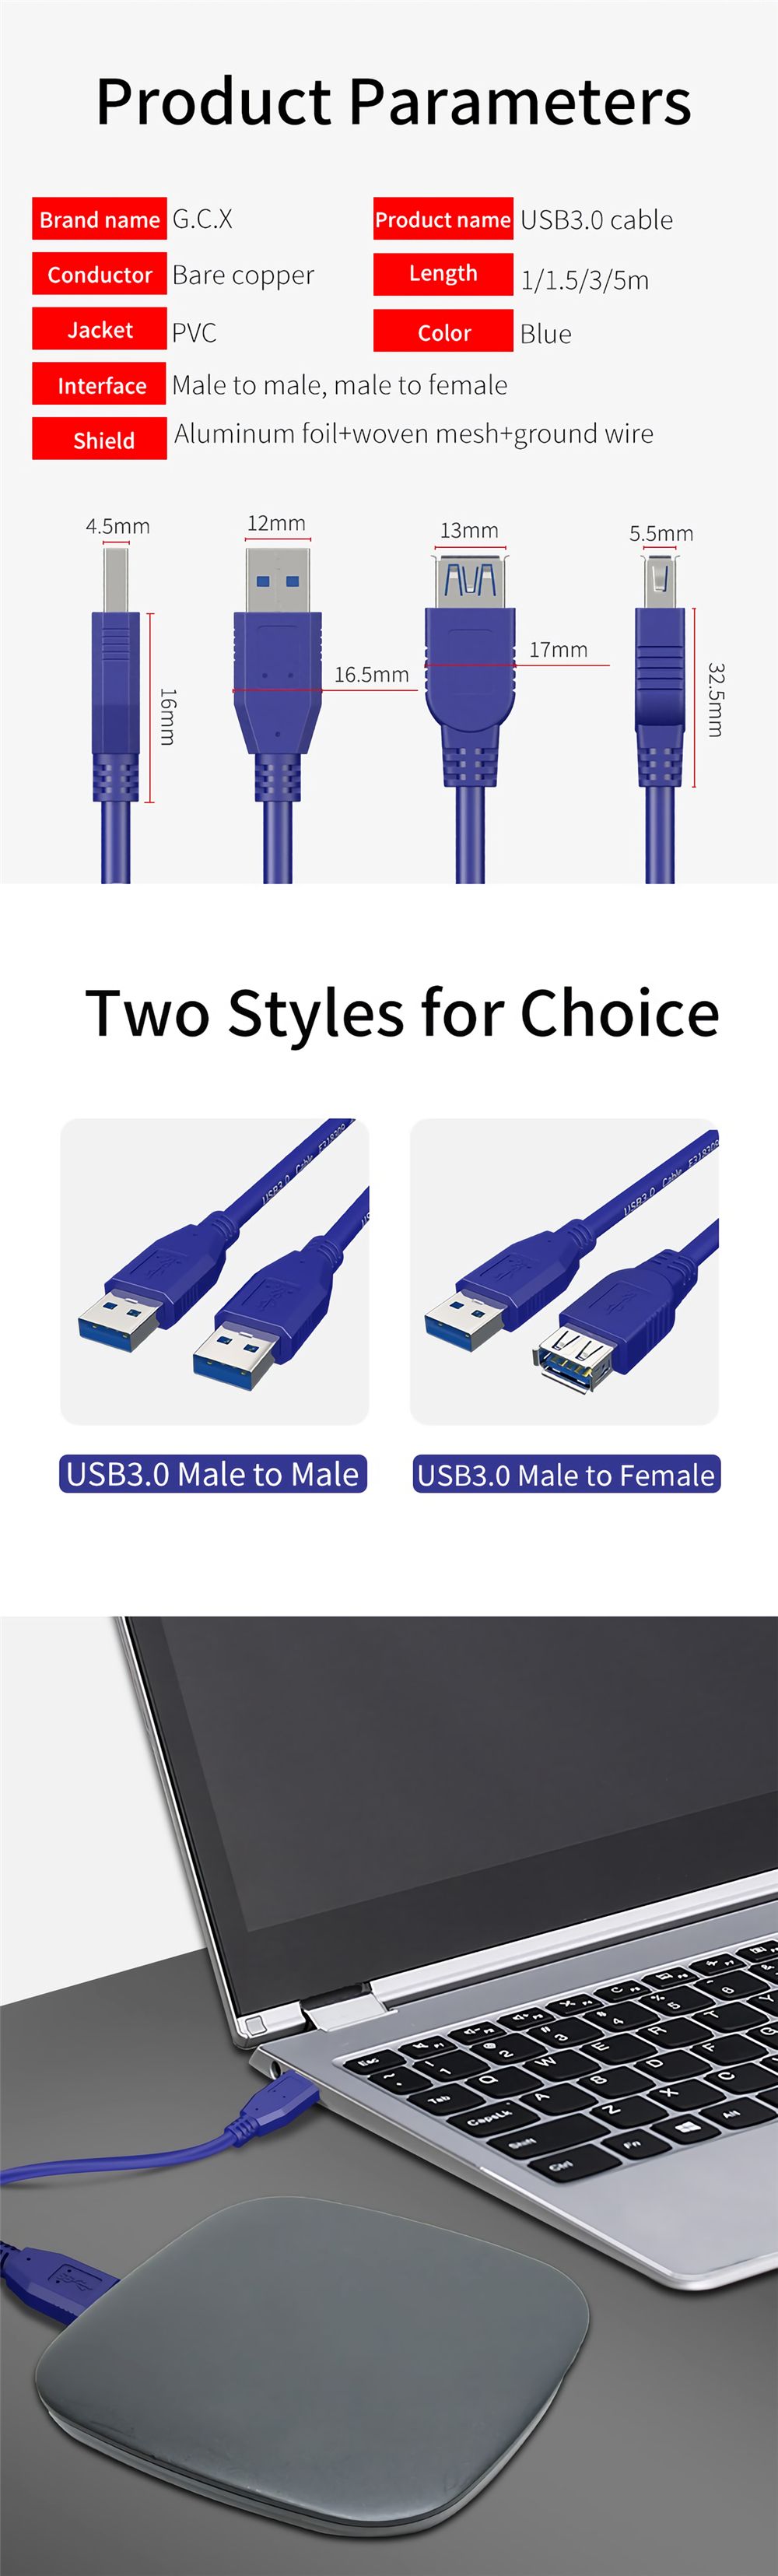 GCX-USB-30-Data-Cable-Male-to-Male-Extension-Cable-USB-30-Cable-Extender-for-Computer-PC-Tablet-Radi-1690145